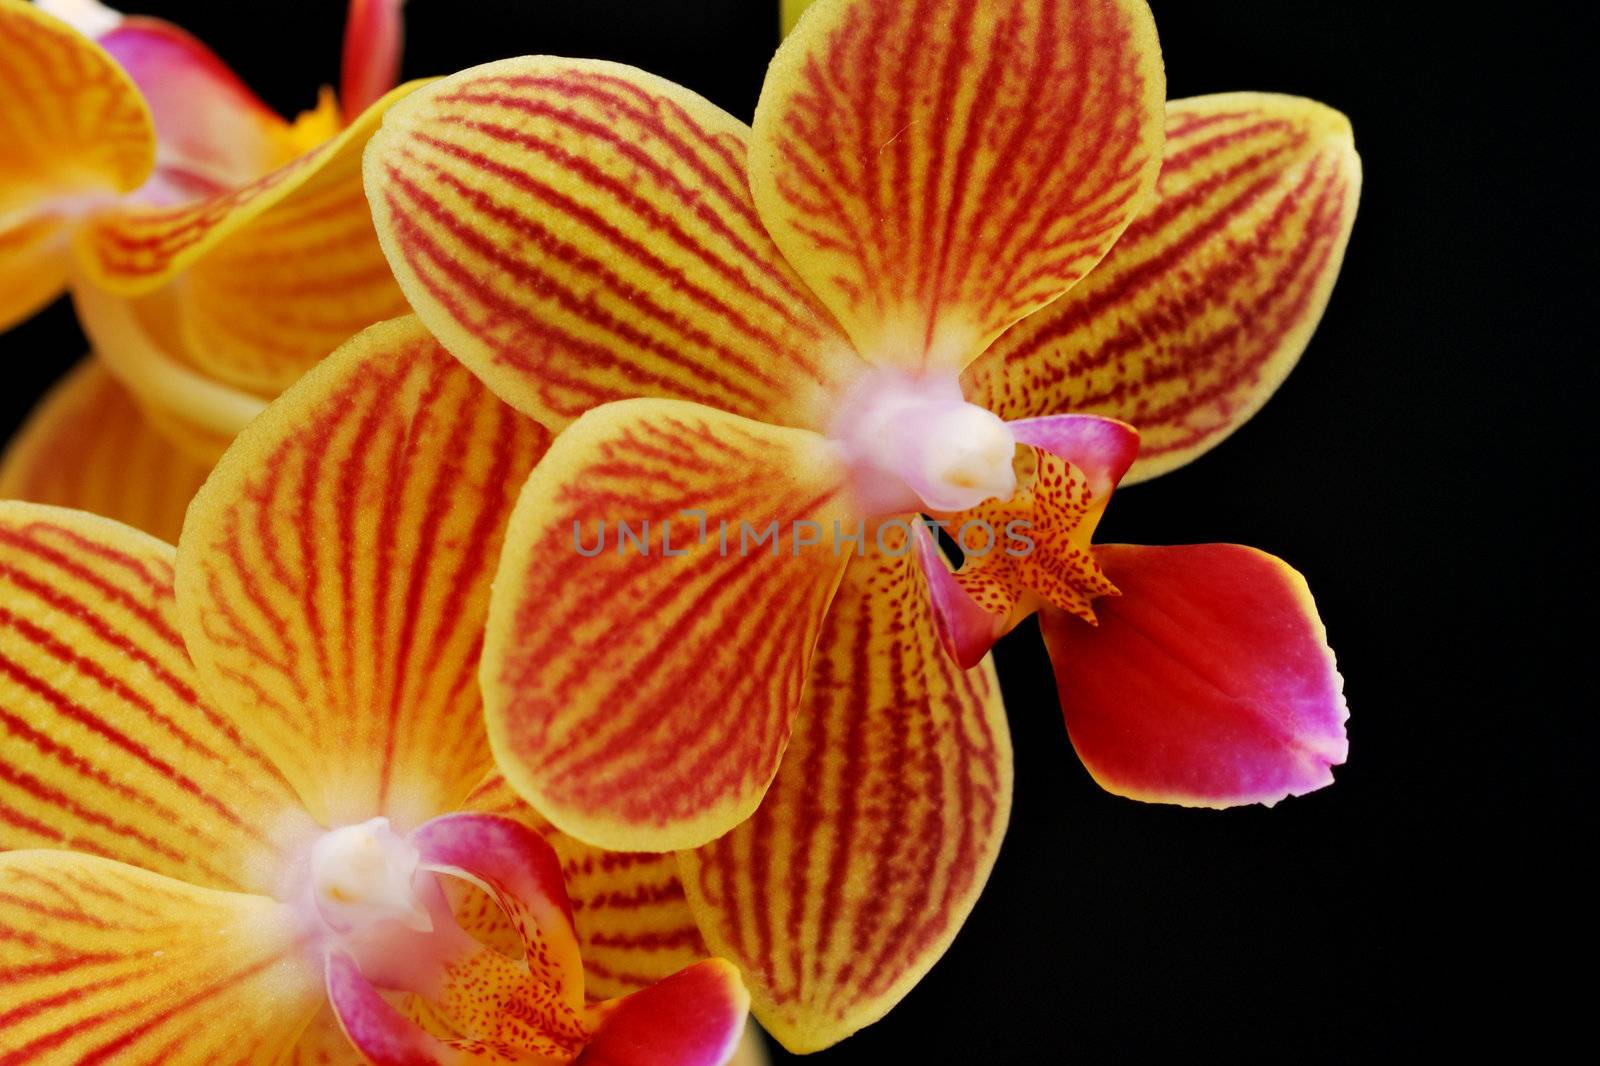 Orchid close up by pauws99